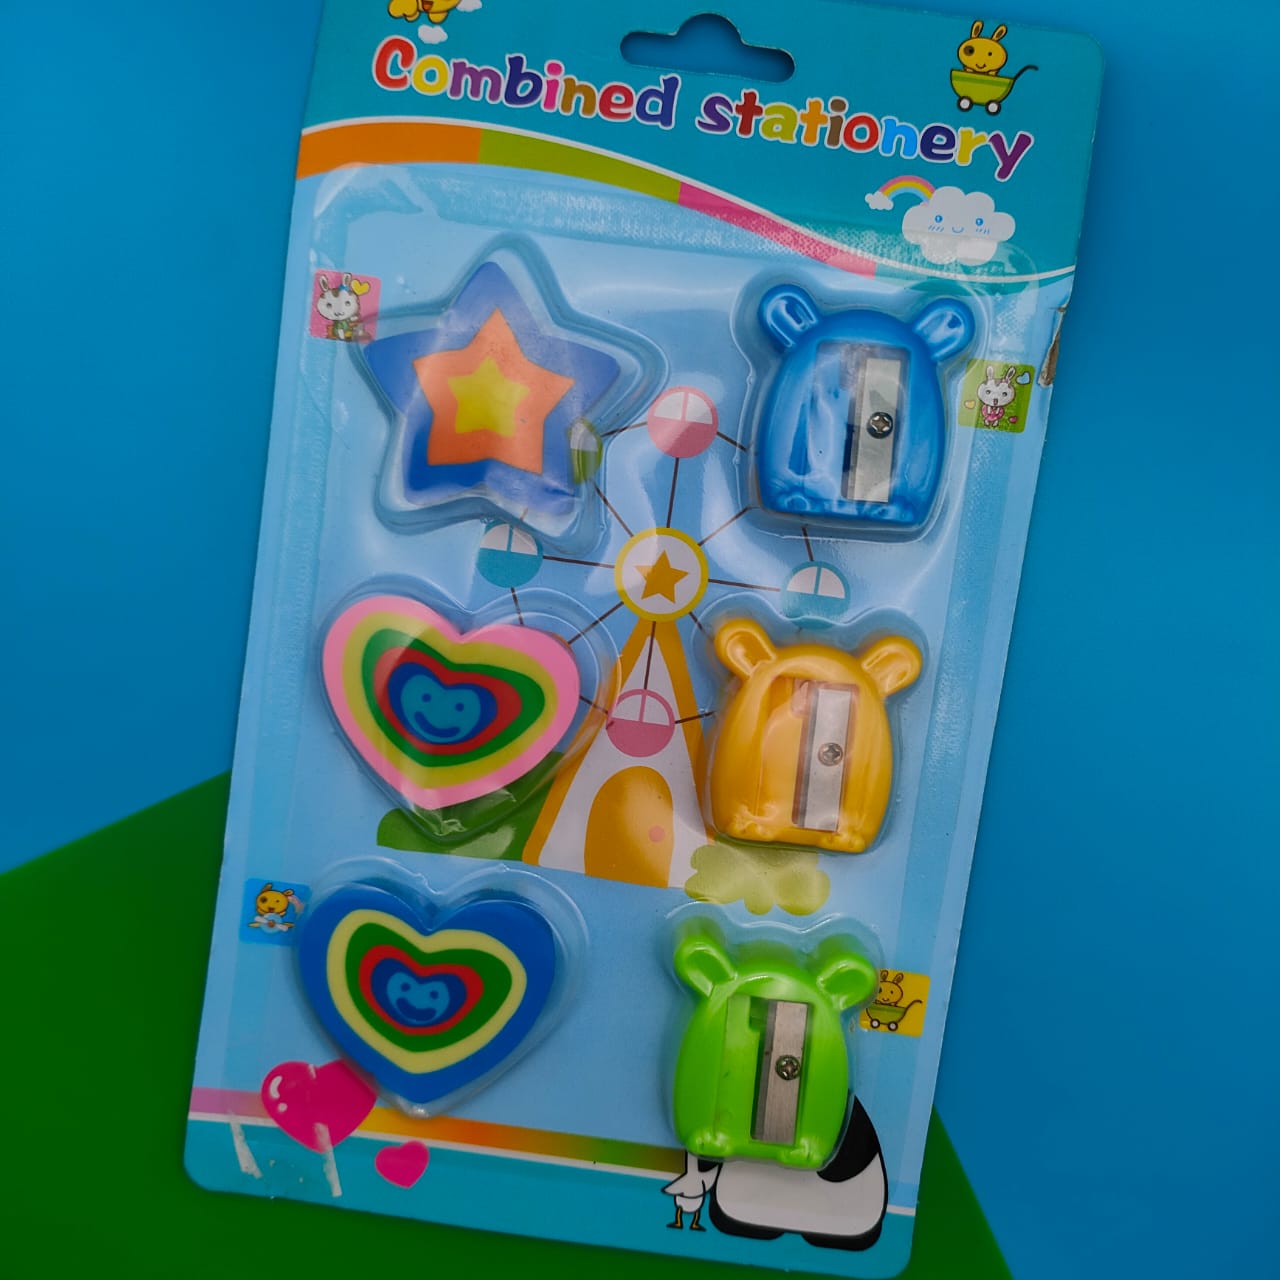 1 Pack Of Combined Stationary